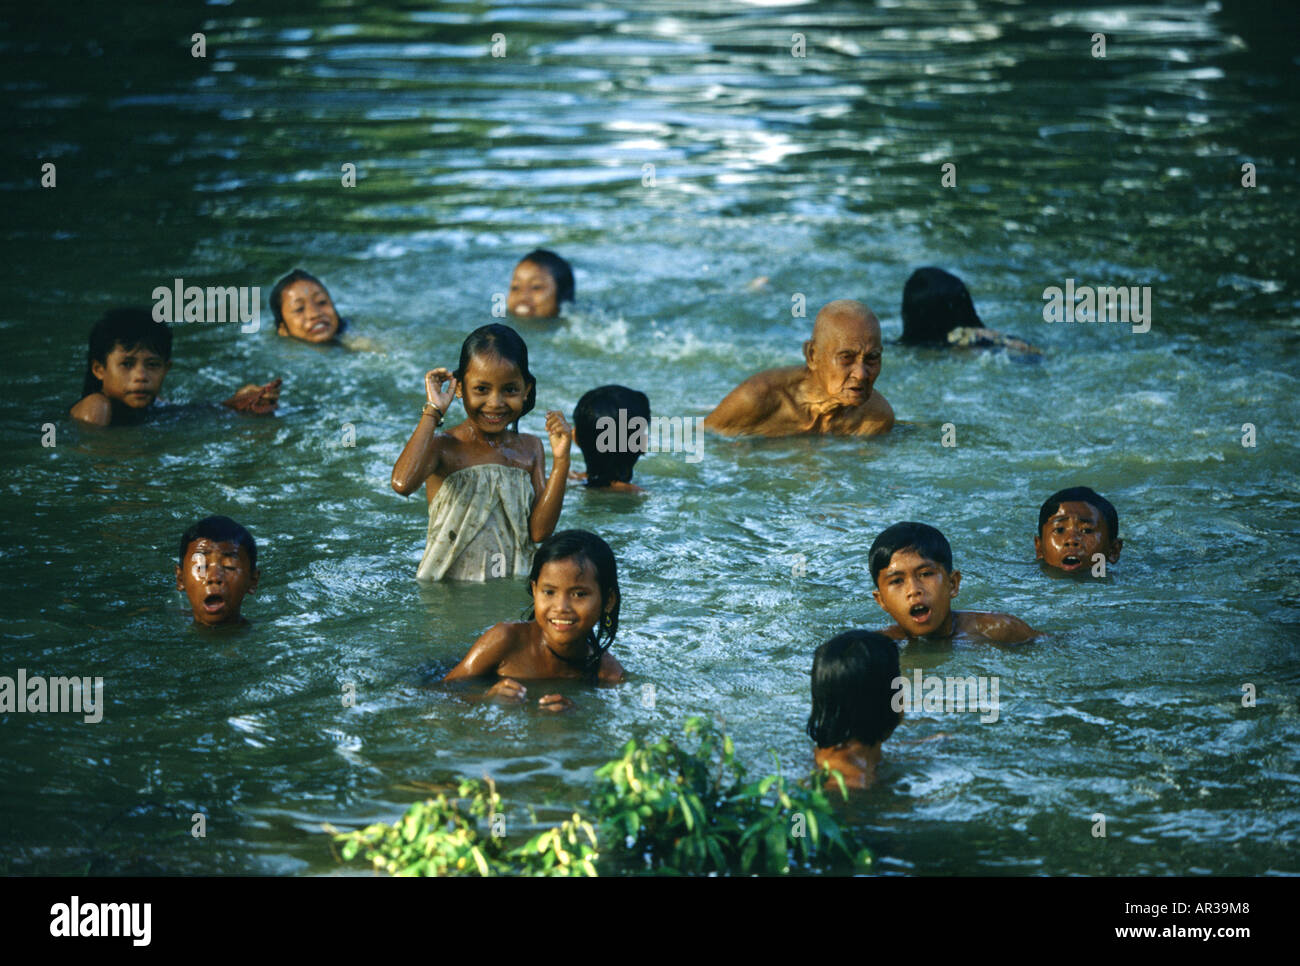 Bathing in Mekong River, Tonle Sap Lake, Siem Reap Province, Cambodia Indochina, Asia Stock Photo